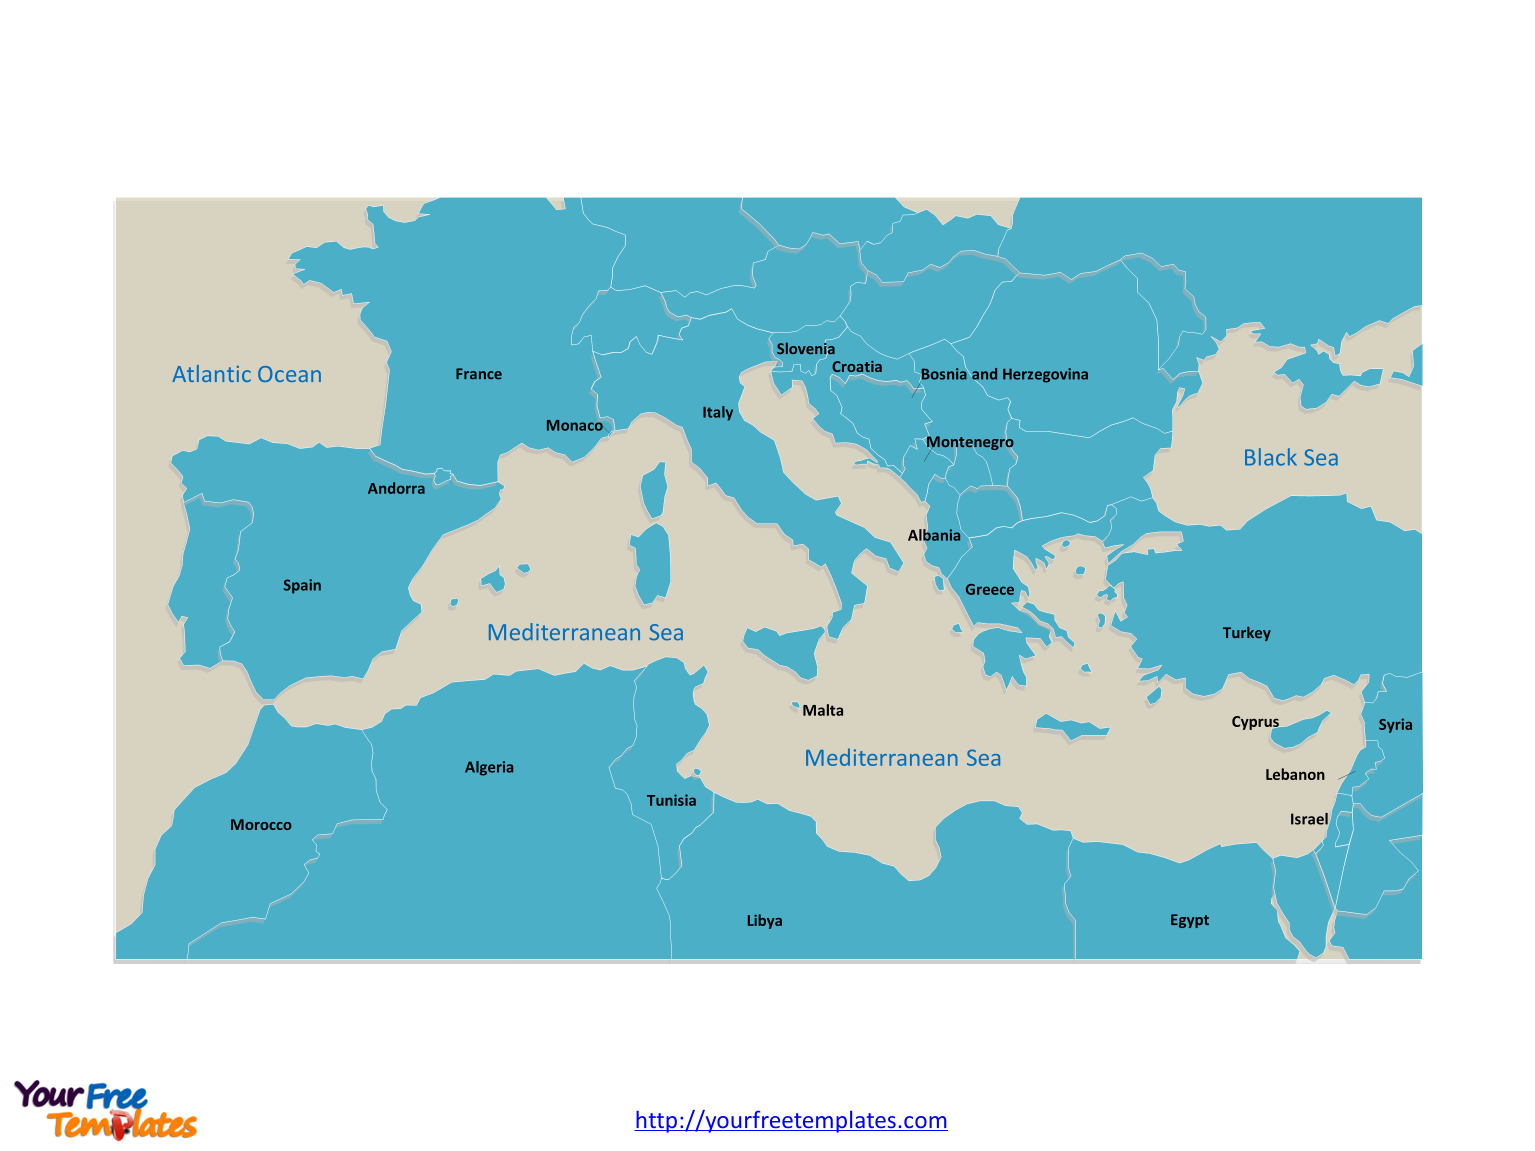 Mediterranean Sea map labeled with cities